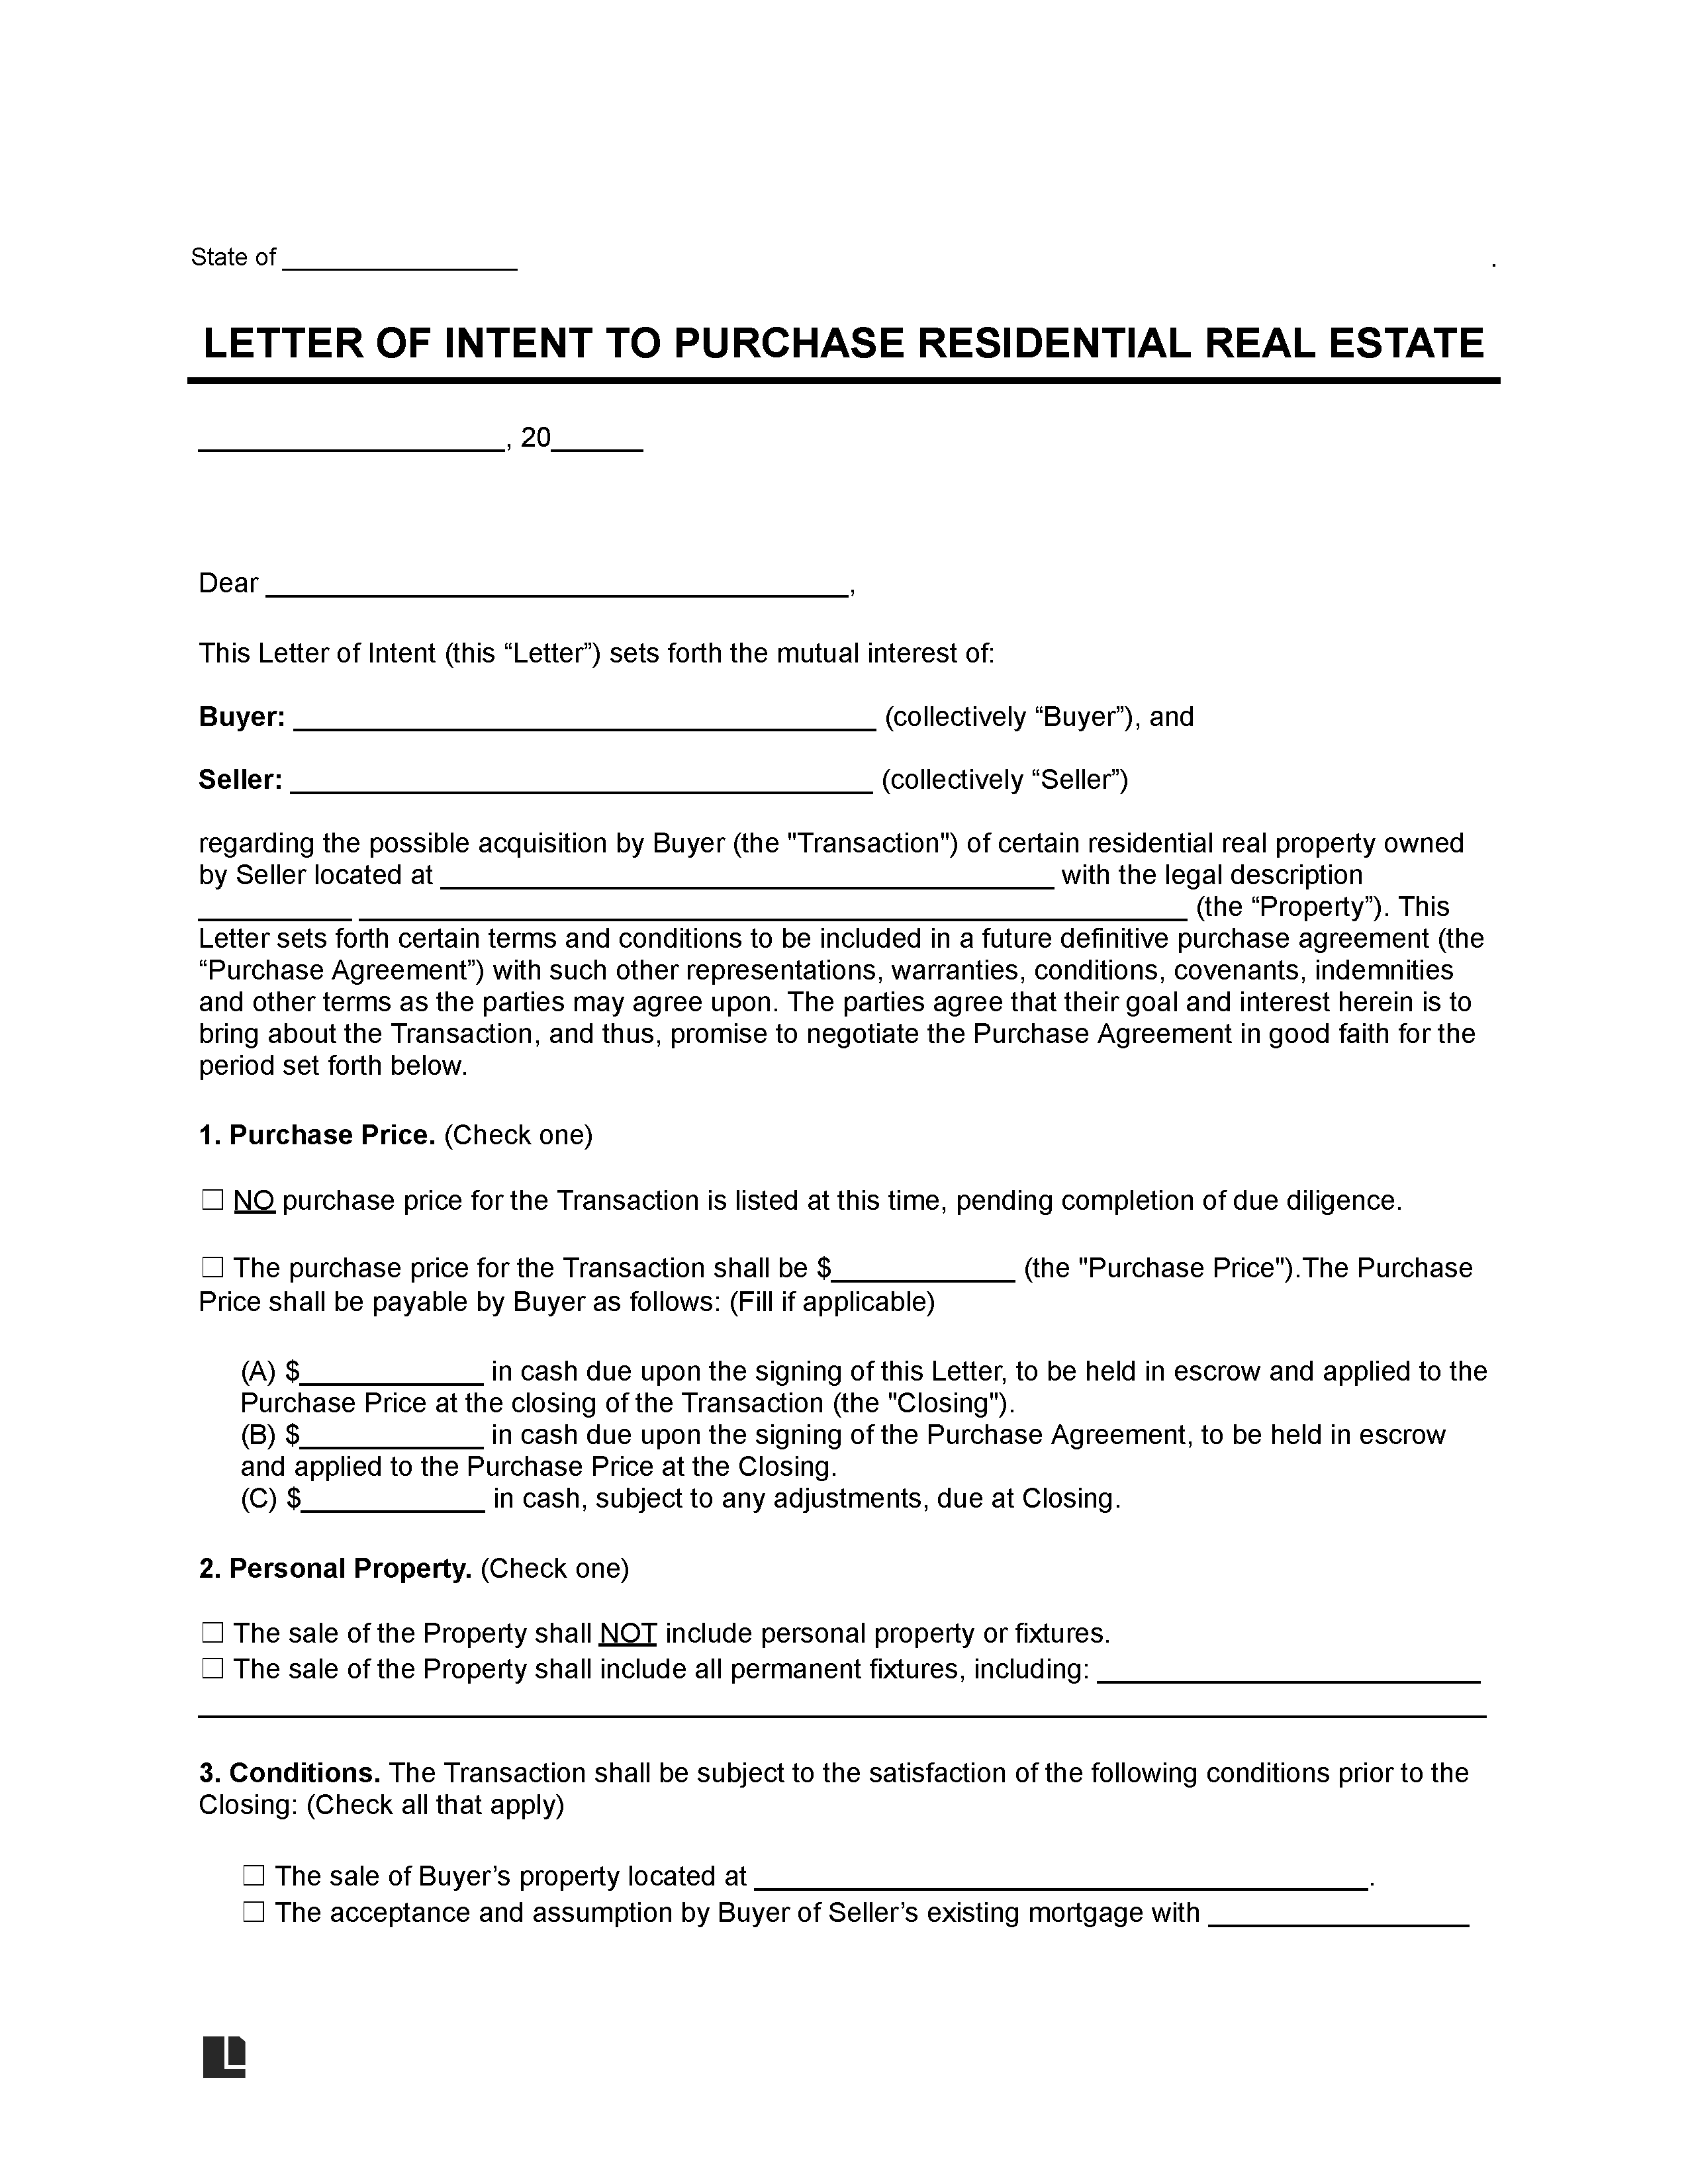 residential purchase letter of intent template